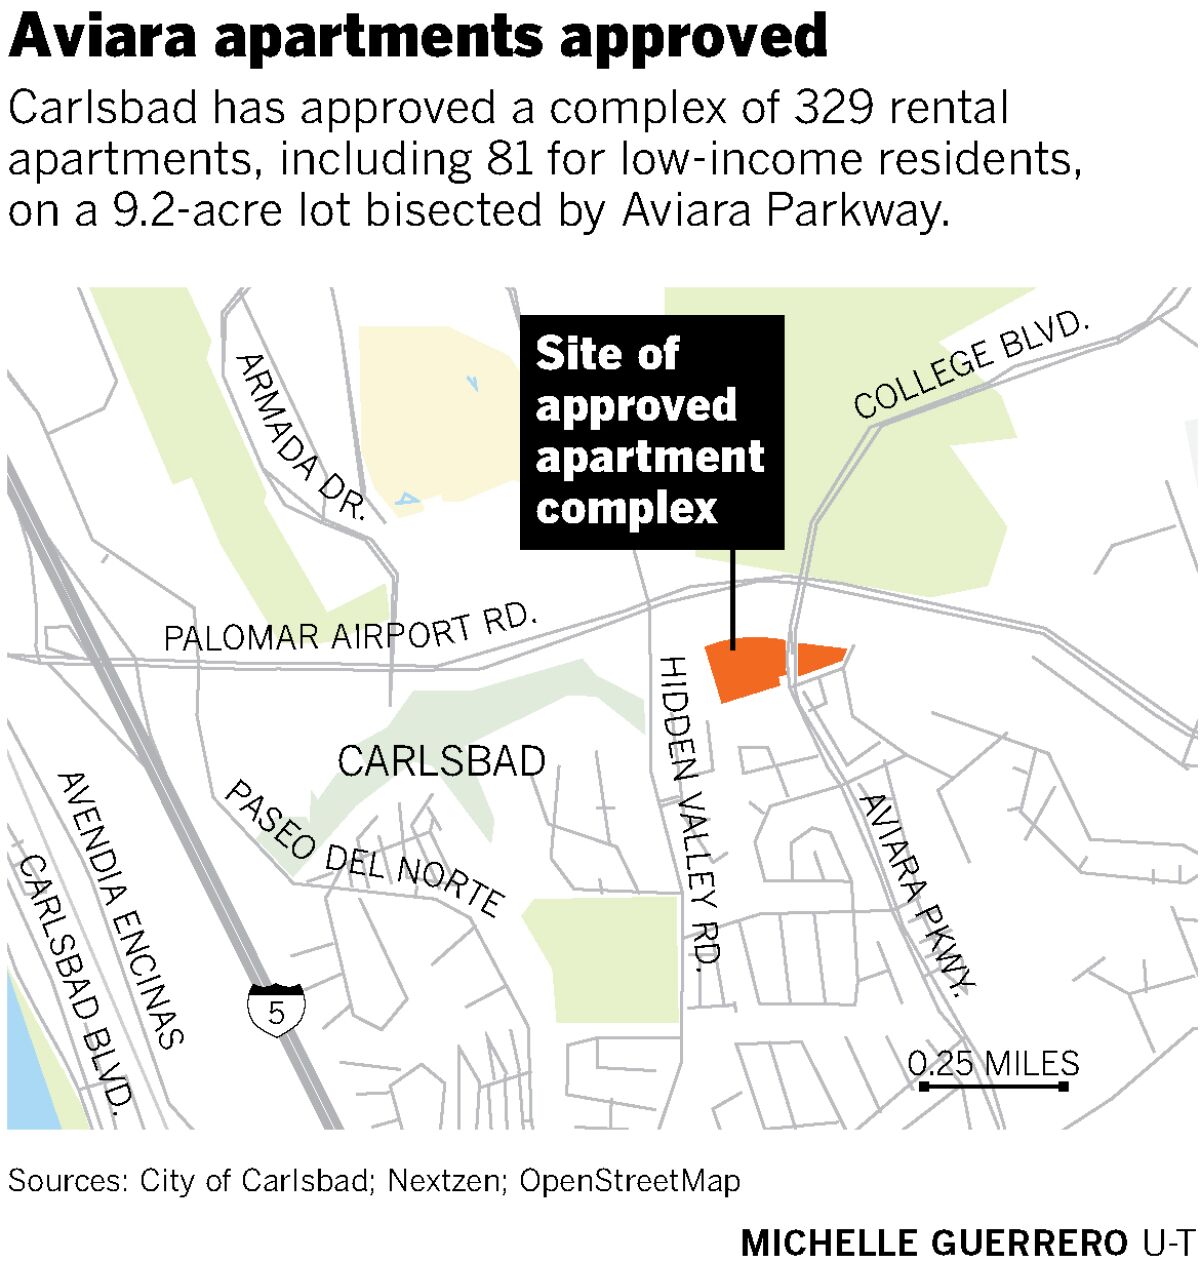 Aviara Apartments approved